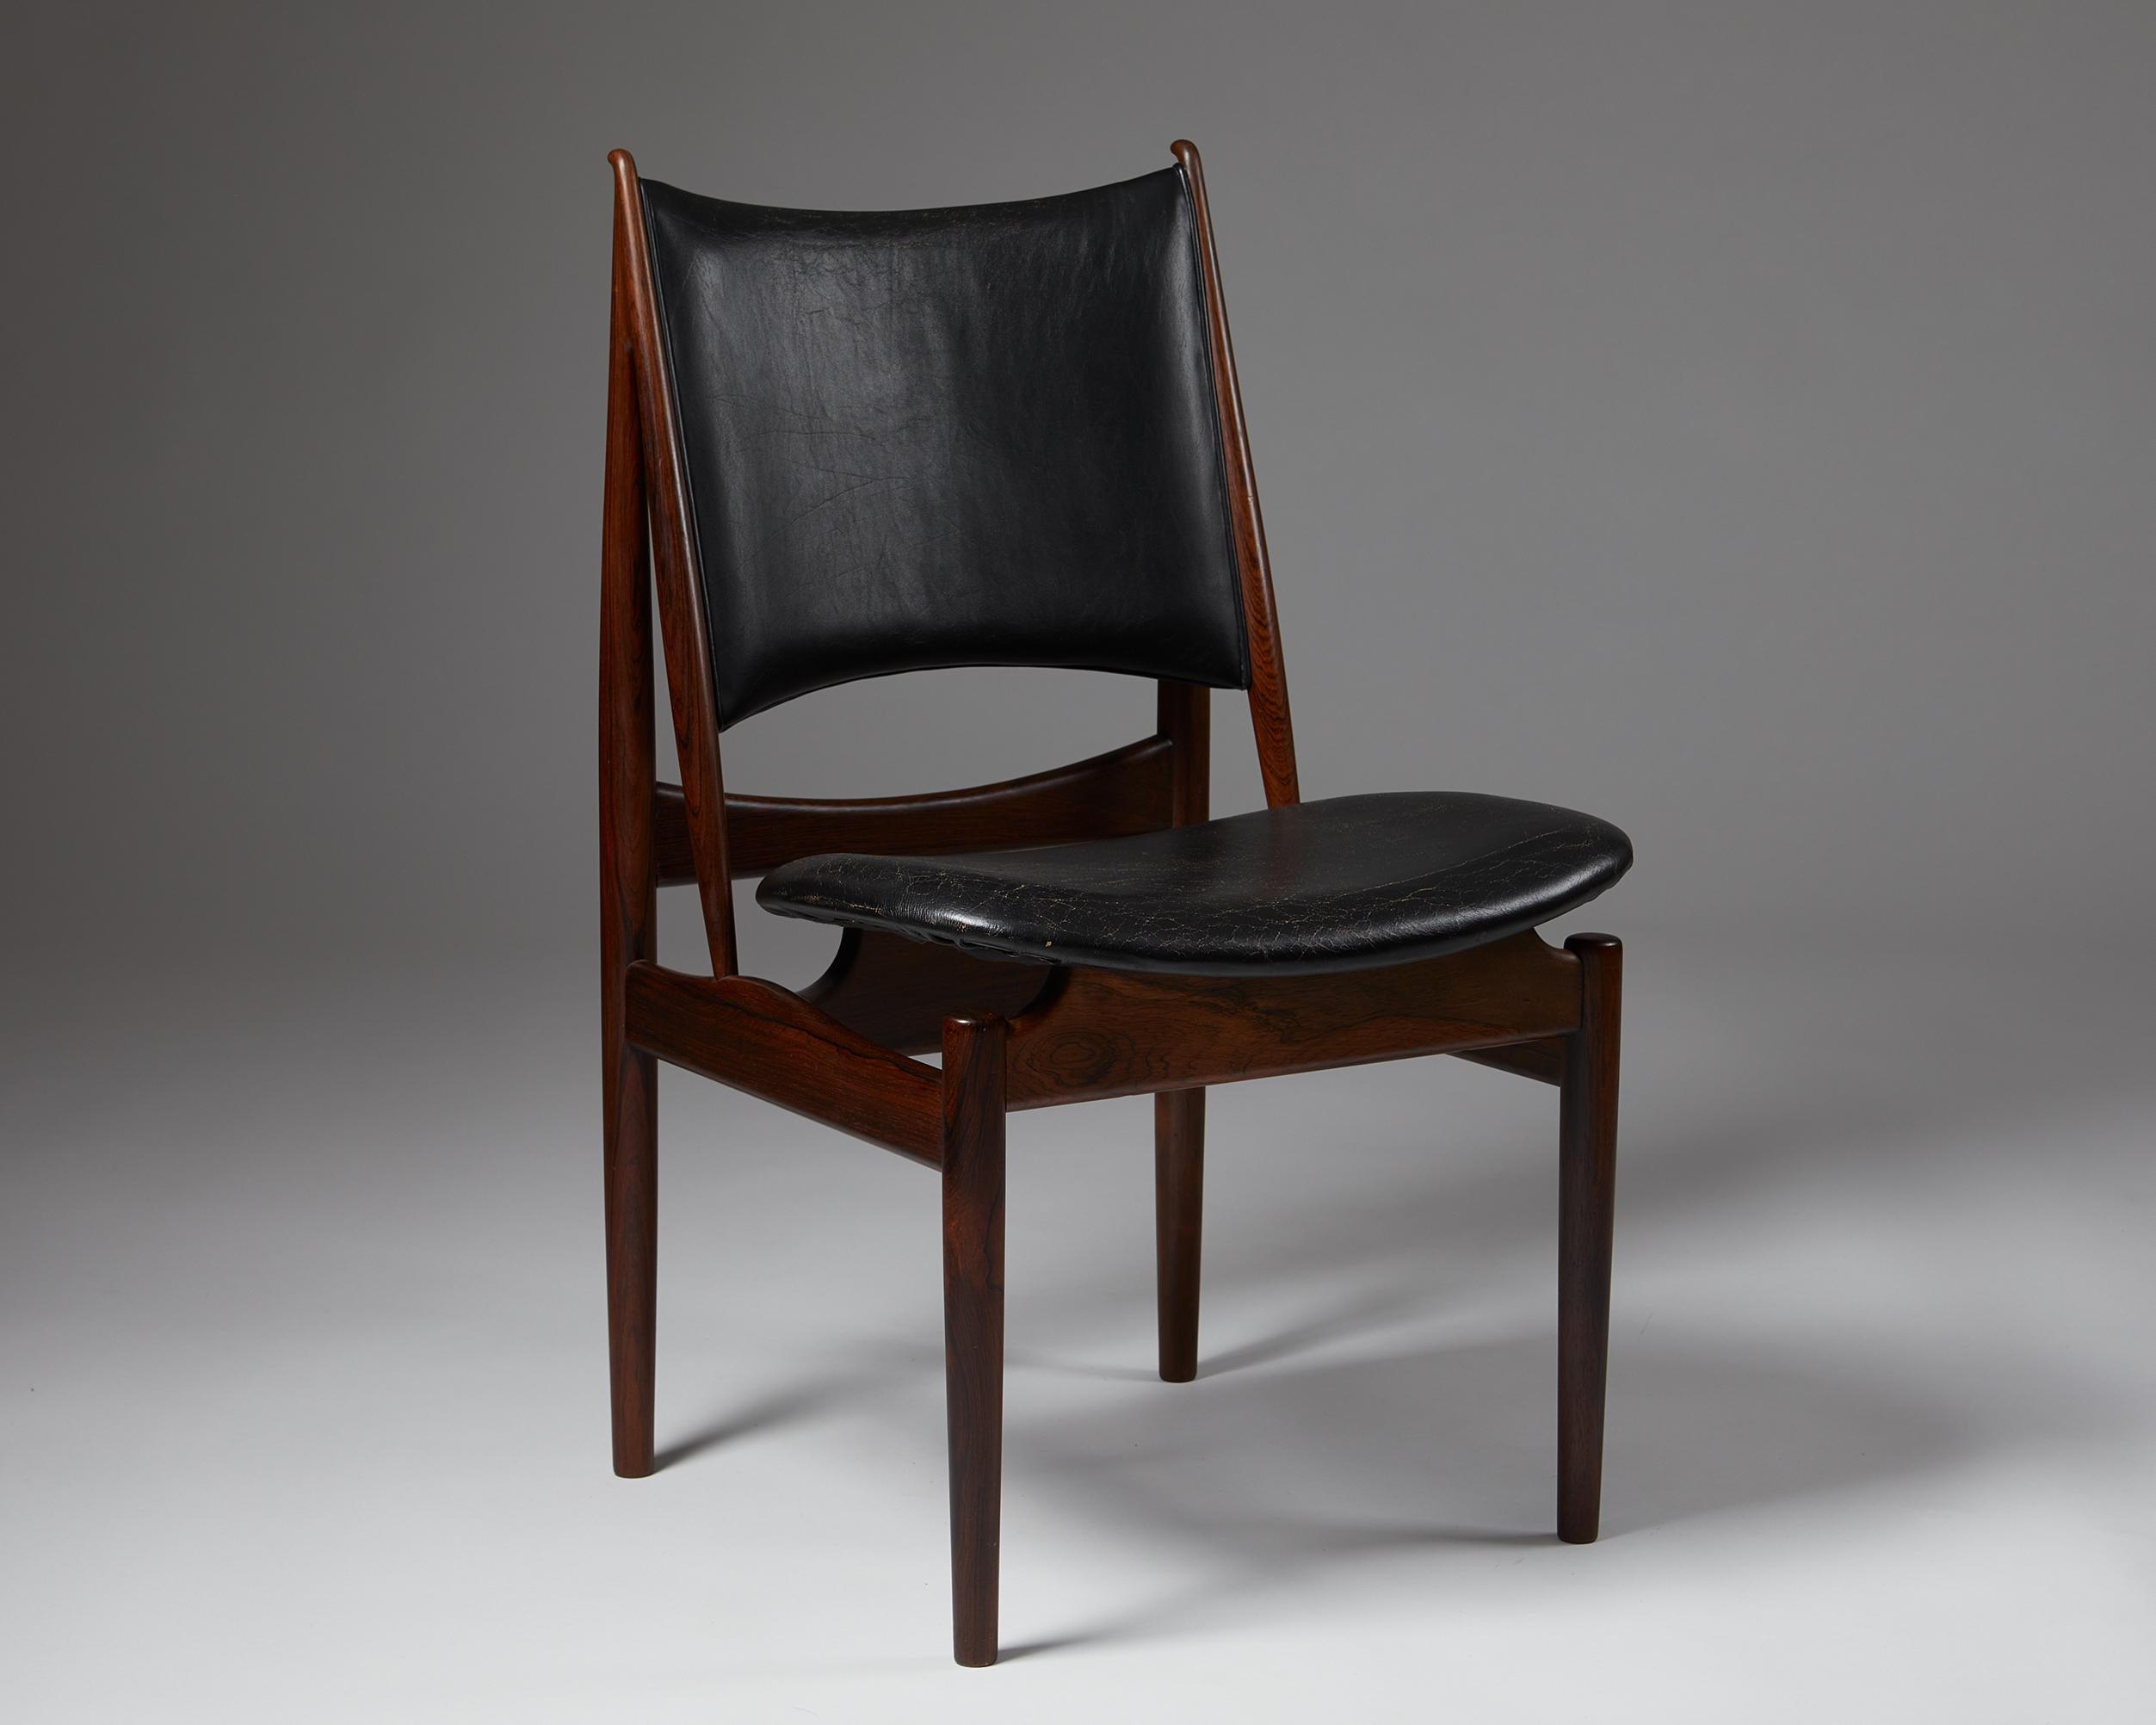 Chair “Egyptian” designed by Finn Juhl for Niels Vodder,
Denmark, 1949.
Made and stamped by the maker.

Brazilian rosewood and leather.

Measurements: 
H: 89.2 cm / 2' 11 1/4’’
SH: 47.5 cm / 1' 6 1/2’’
W: 54 cm / 1' 9 1/2’’
D: 54.2 cm / 1' 9